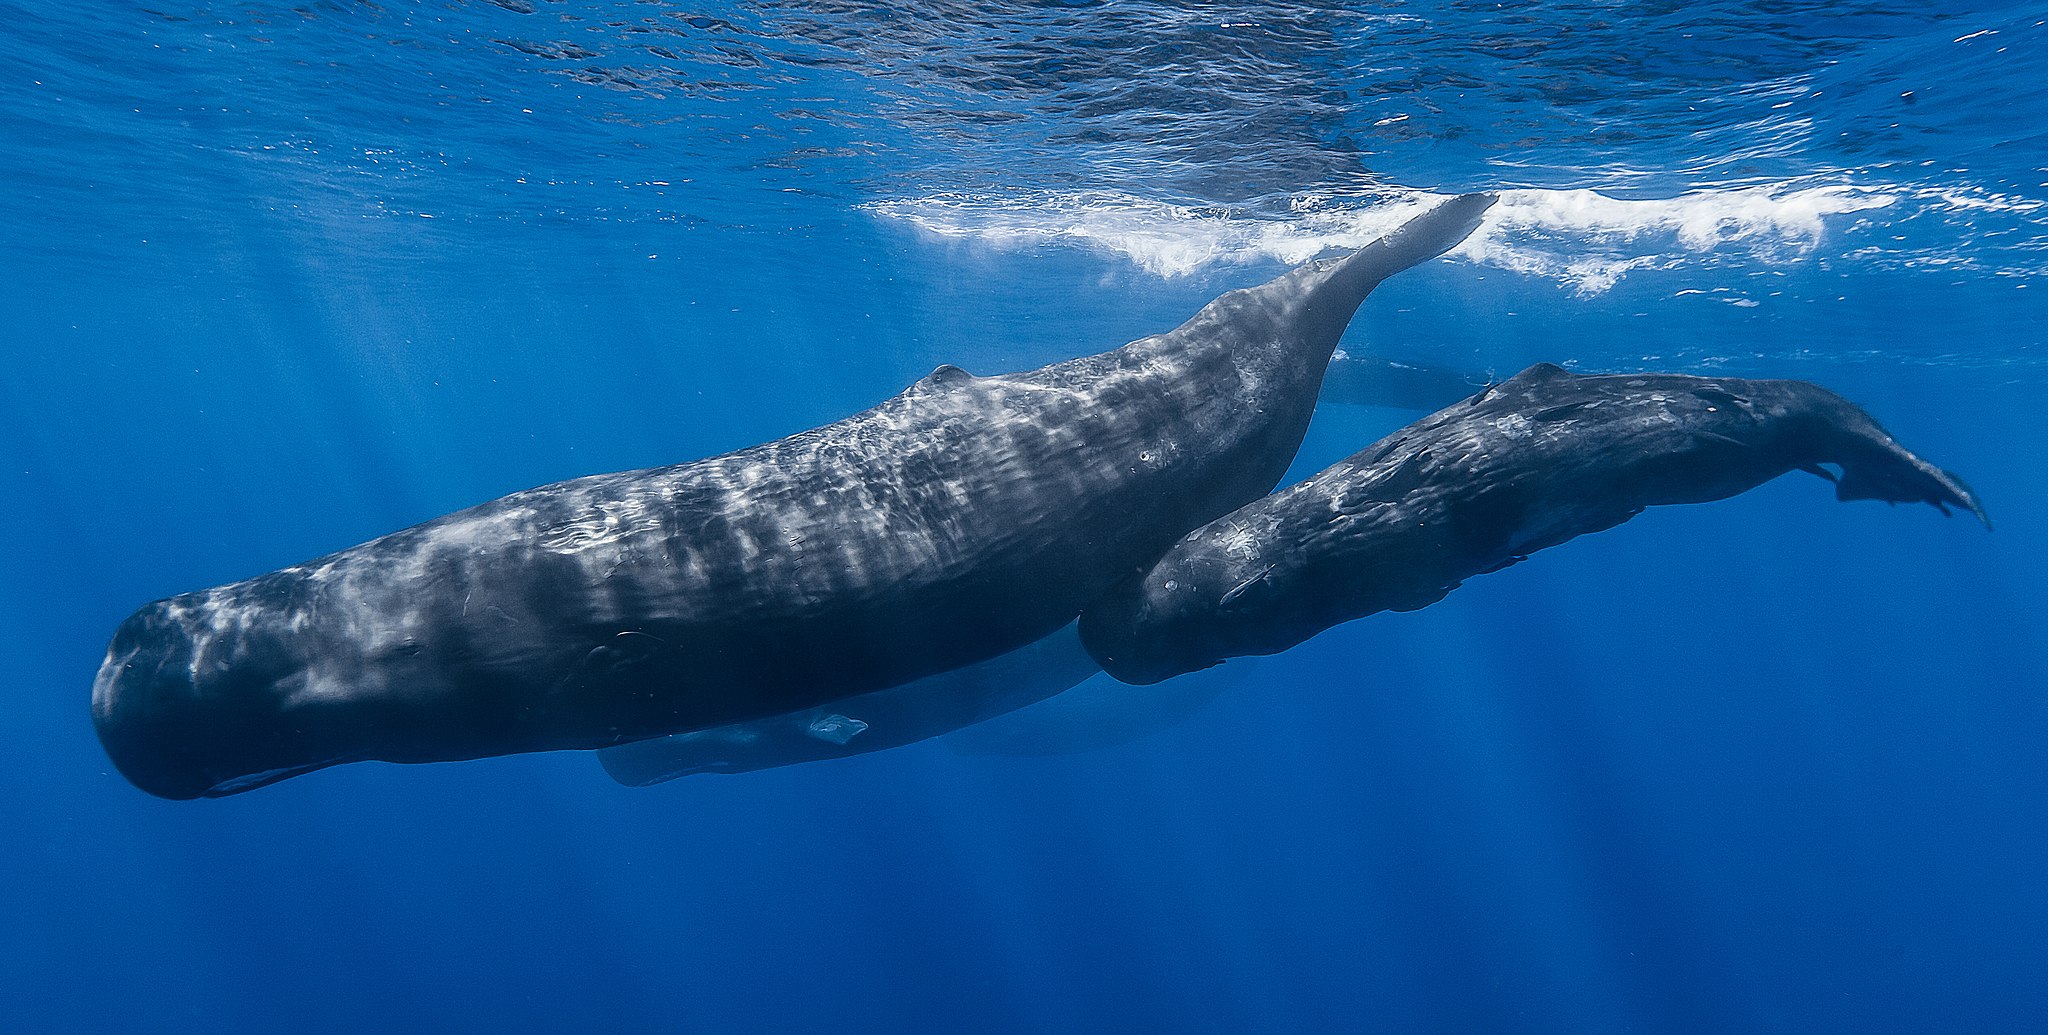 Whales | Image Credit: Gabriel Barathieu, <a href="https://commons.wikimedia.org/wiki/File:Sperm_whale_pod.jpg">Sperm whale pod</a>, <a href="https://creativecommons.org/licenses/by-sa/2.0/legalcode" rel="license">CC BY-SA 2.0</a>